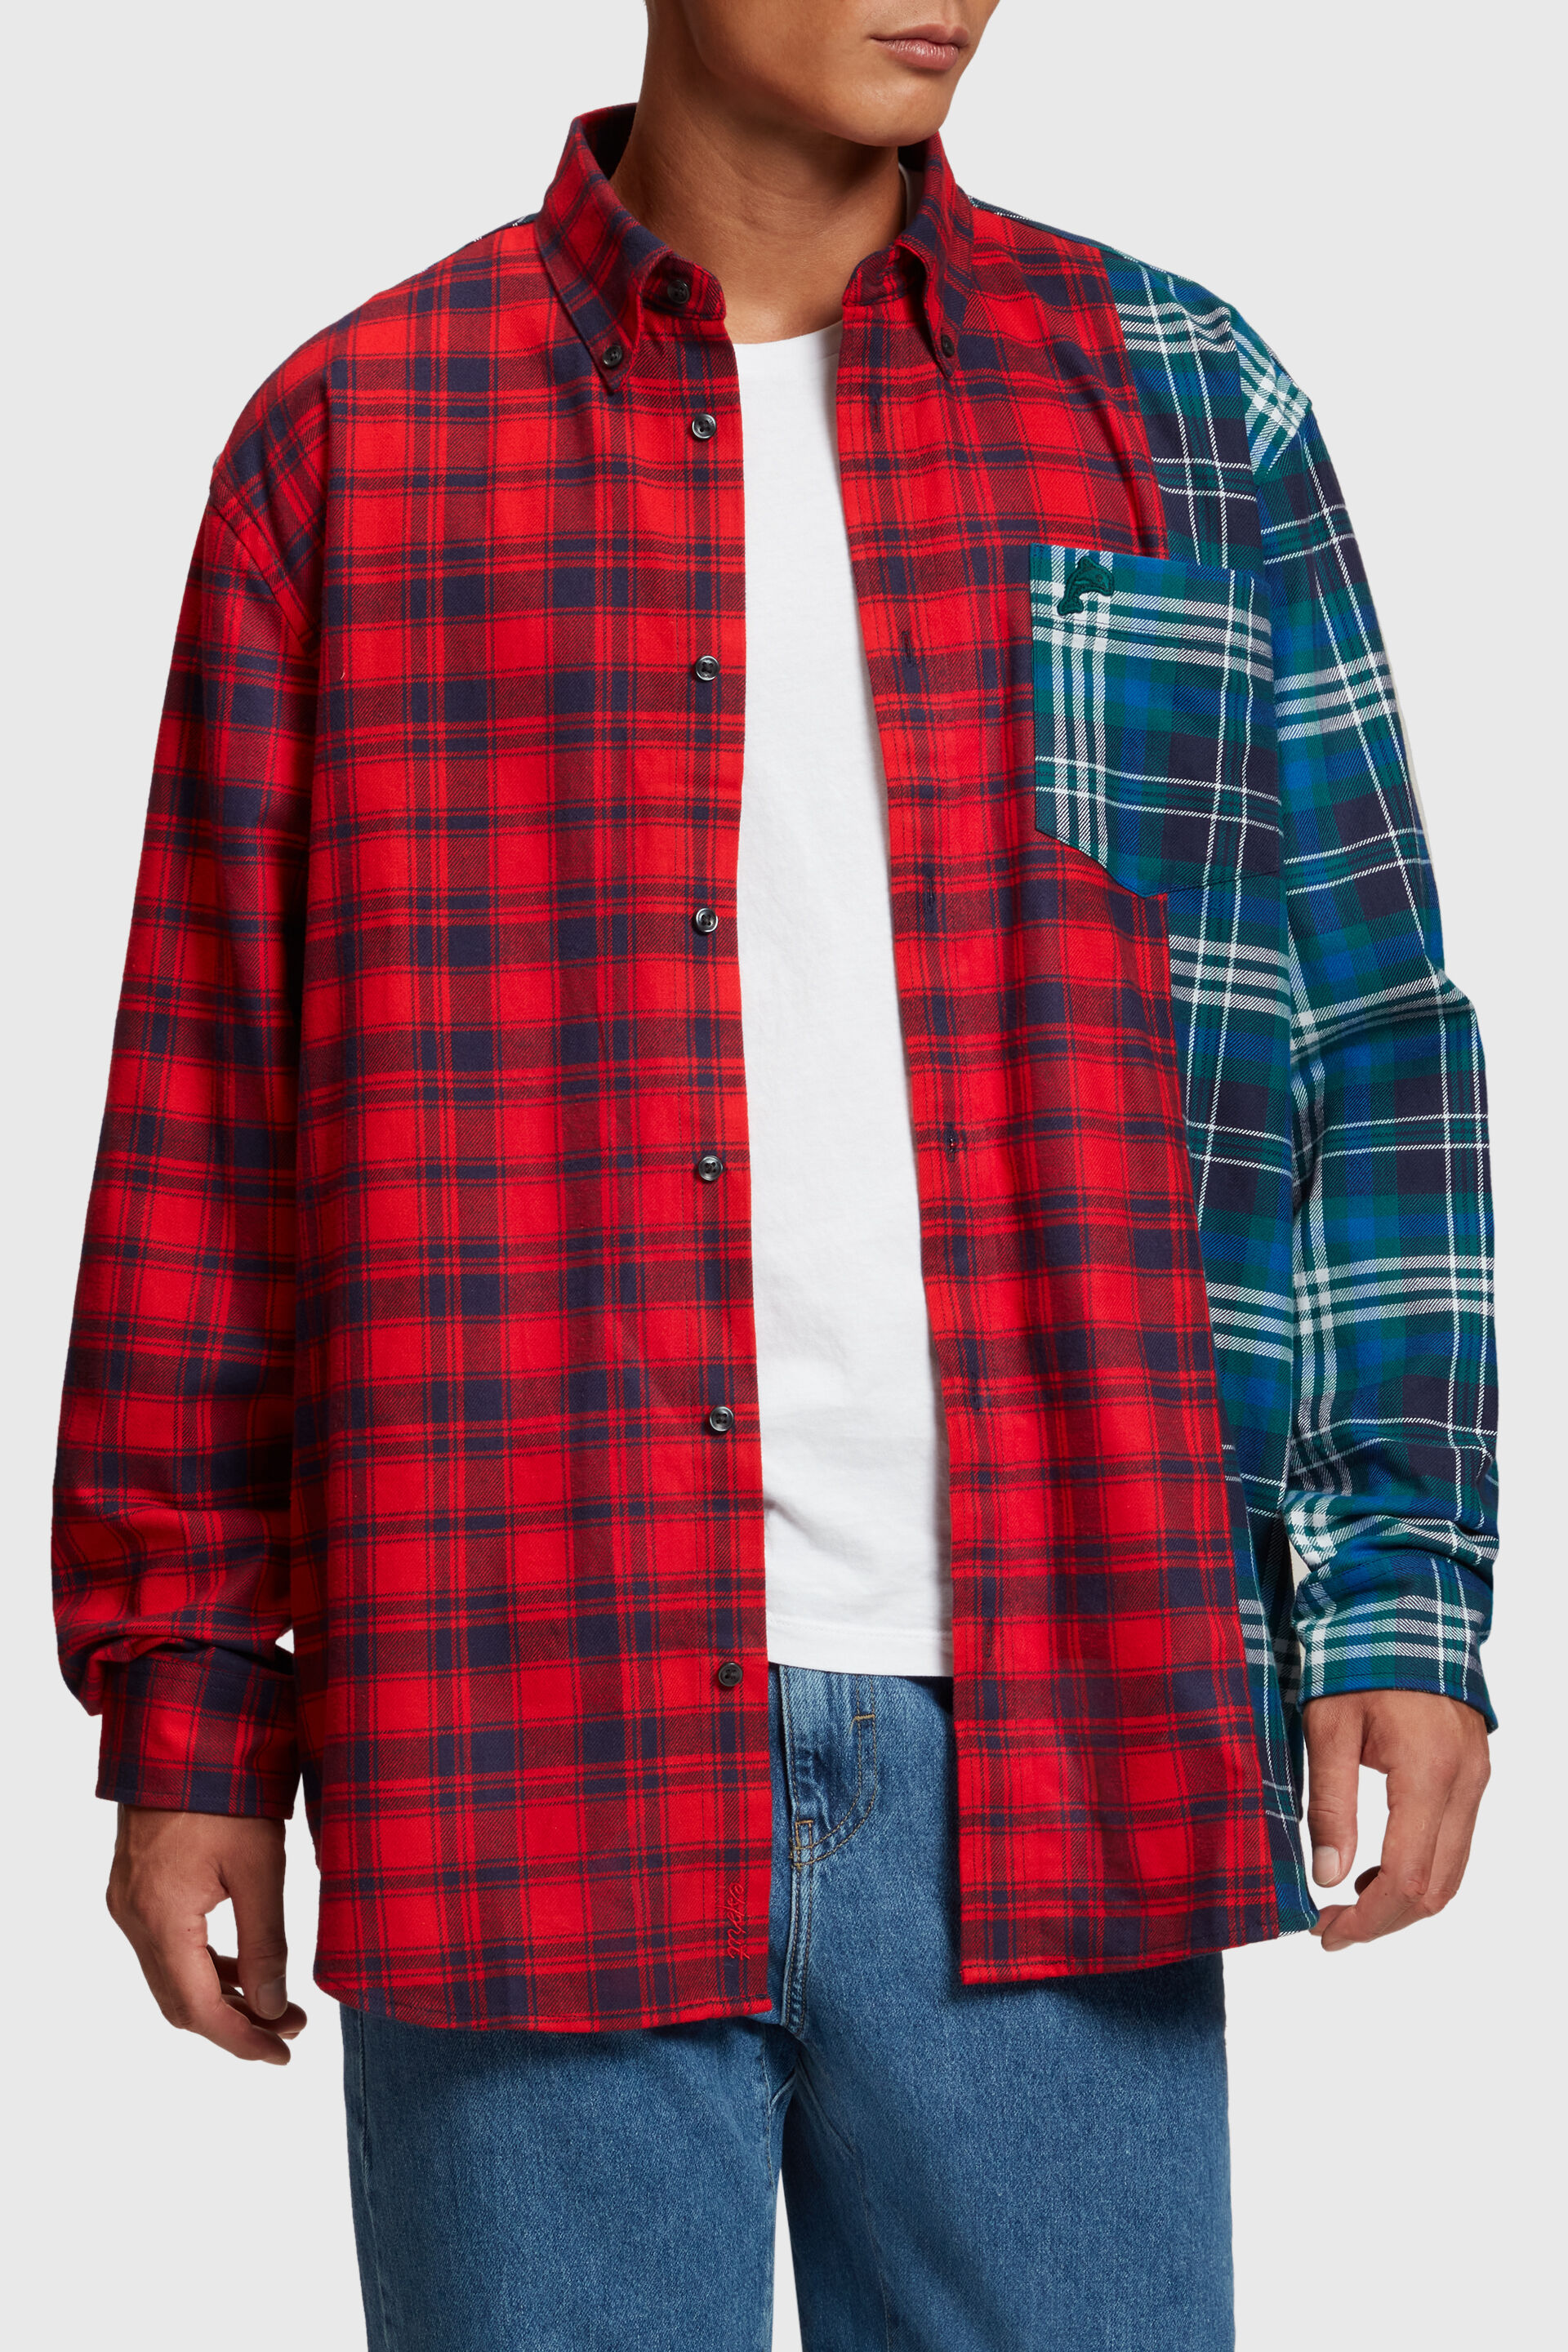 ESPRIT - Mixed check patchwork flannel shirt at our online shop